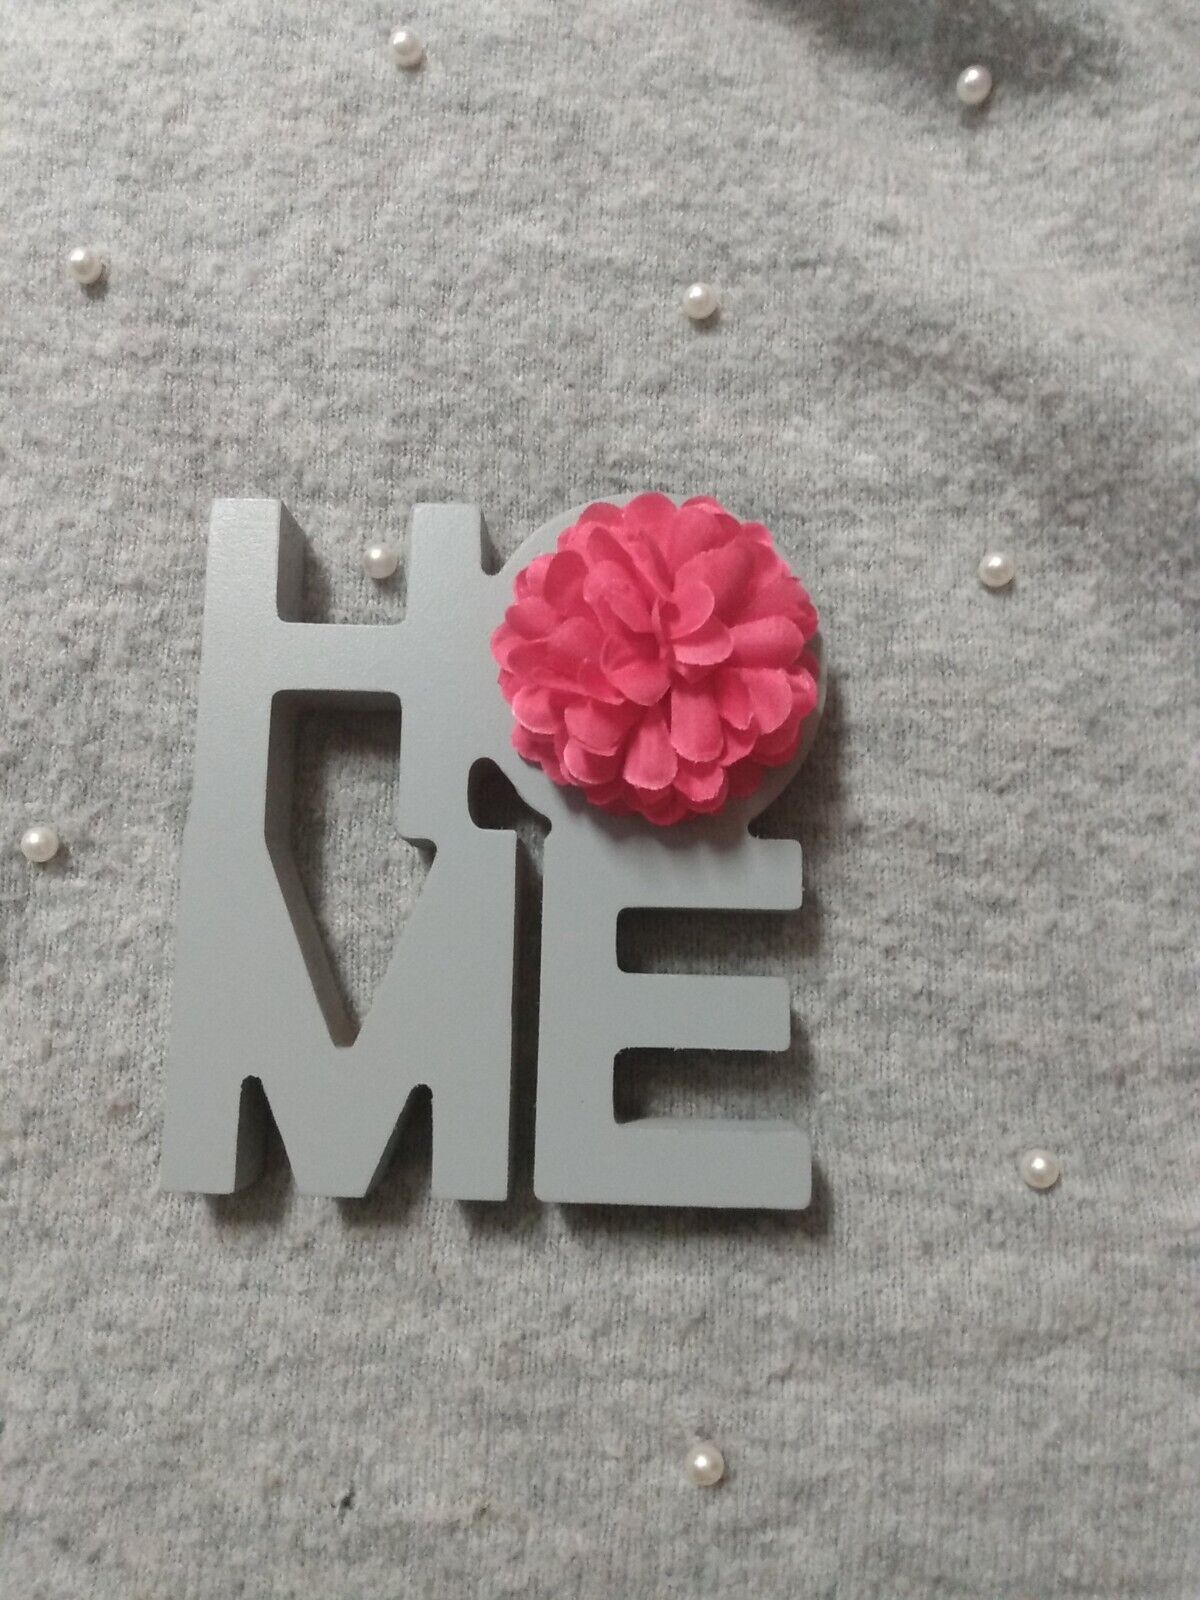 Wooden Home Decor With A Rose Attached To The Word "home